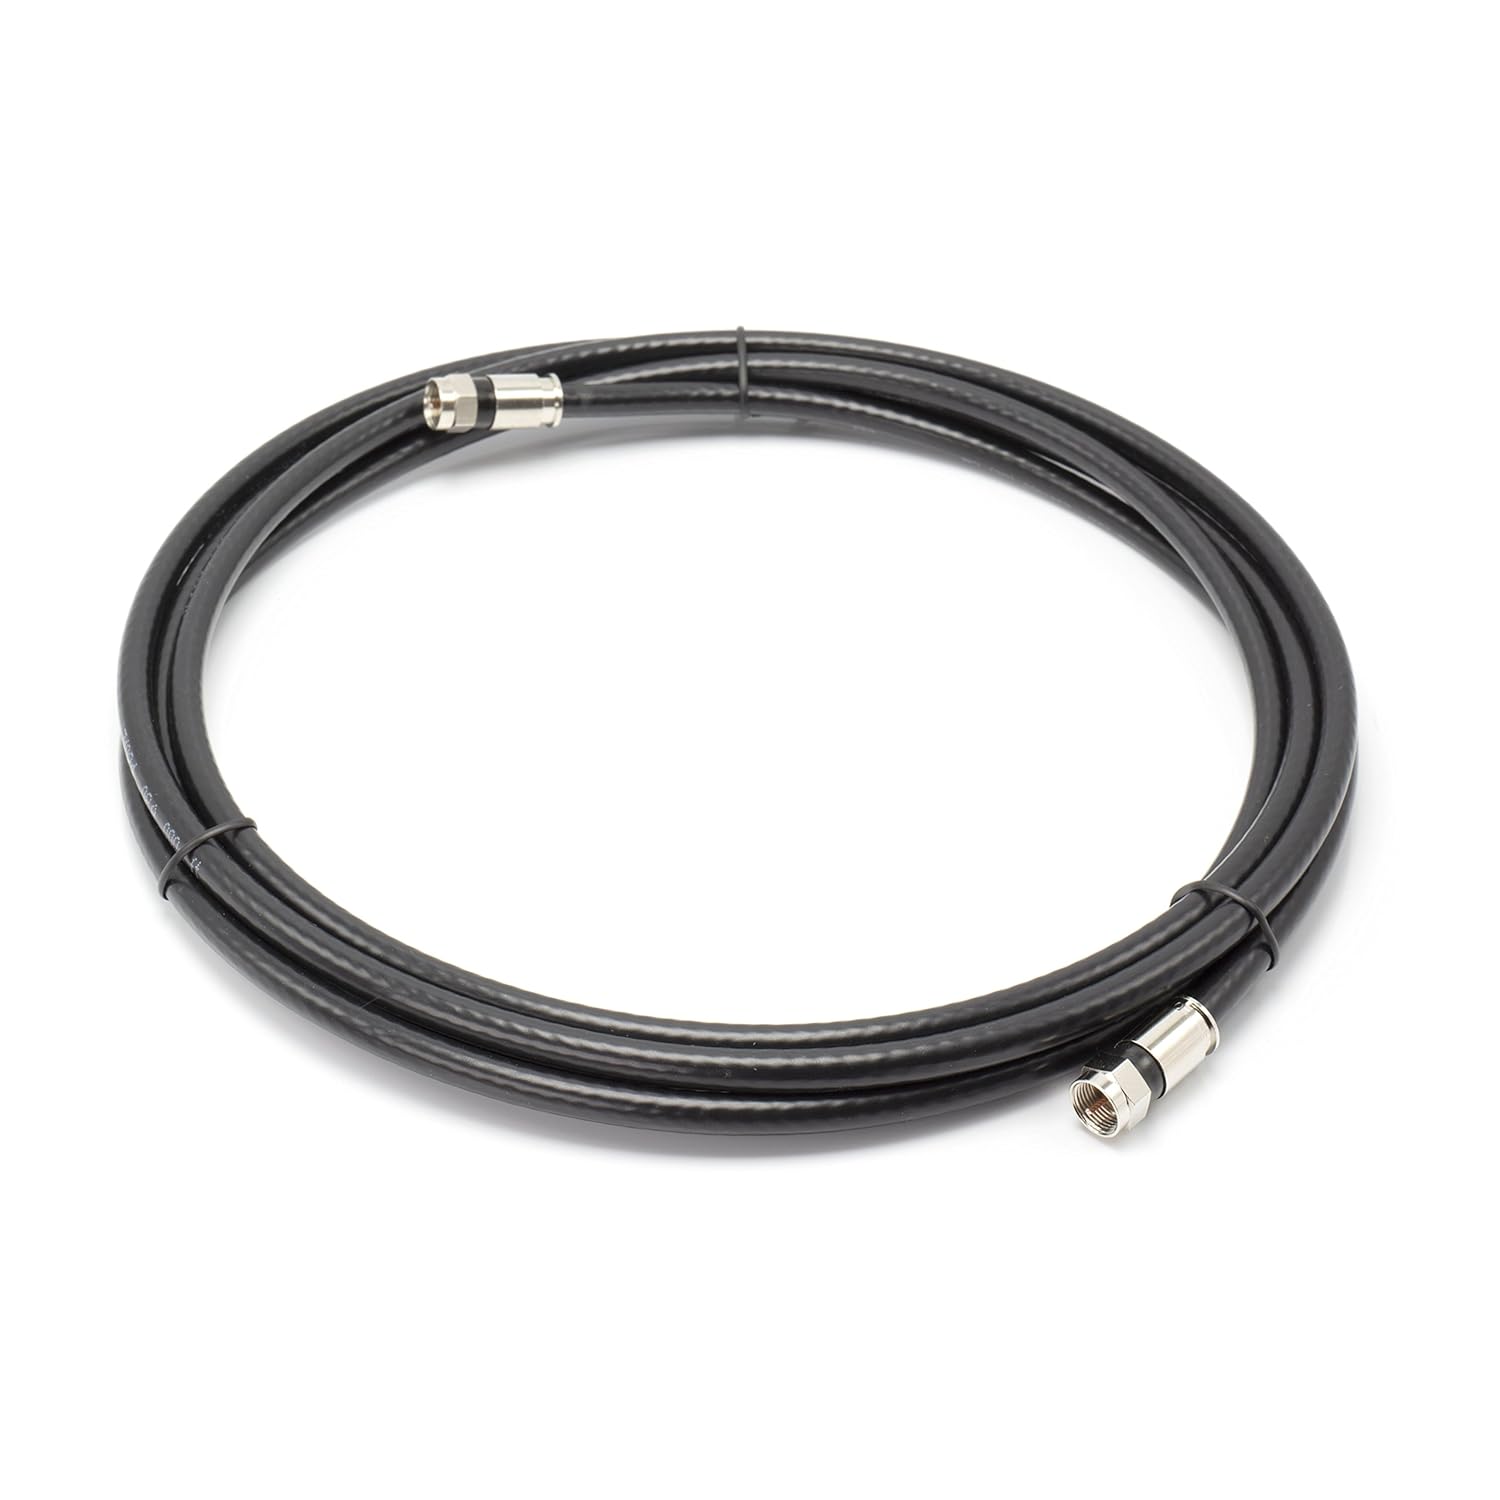 The Cimple Co 15' Feet, Black RG6 Coaxial Cable (Coax Cable) with Weather Proof Connectors, F81 / RF, Digital Coax - AV, Cable TV, Anten…